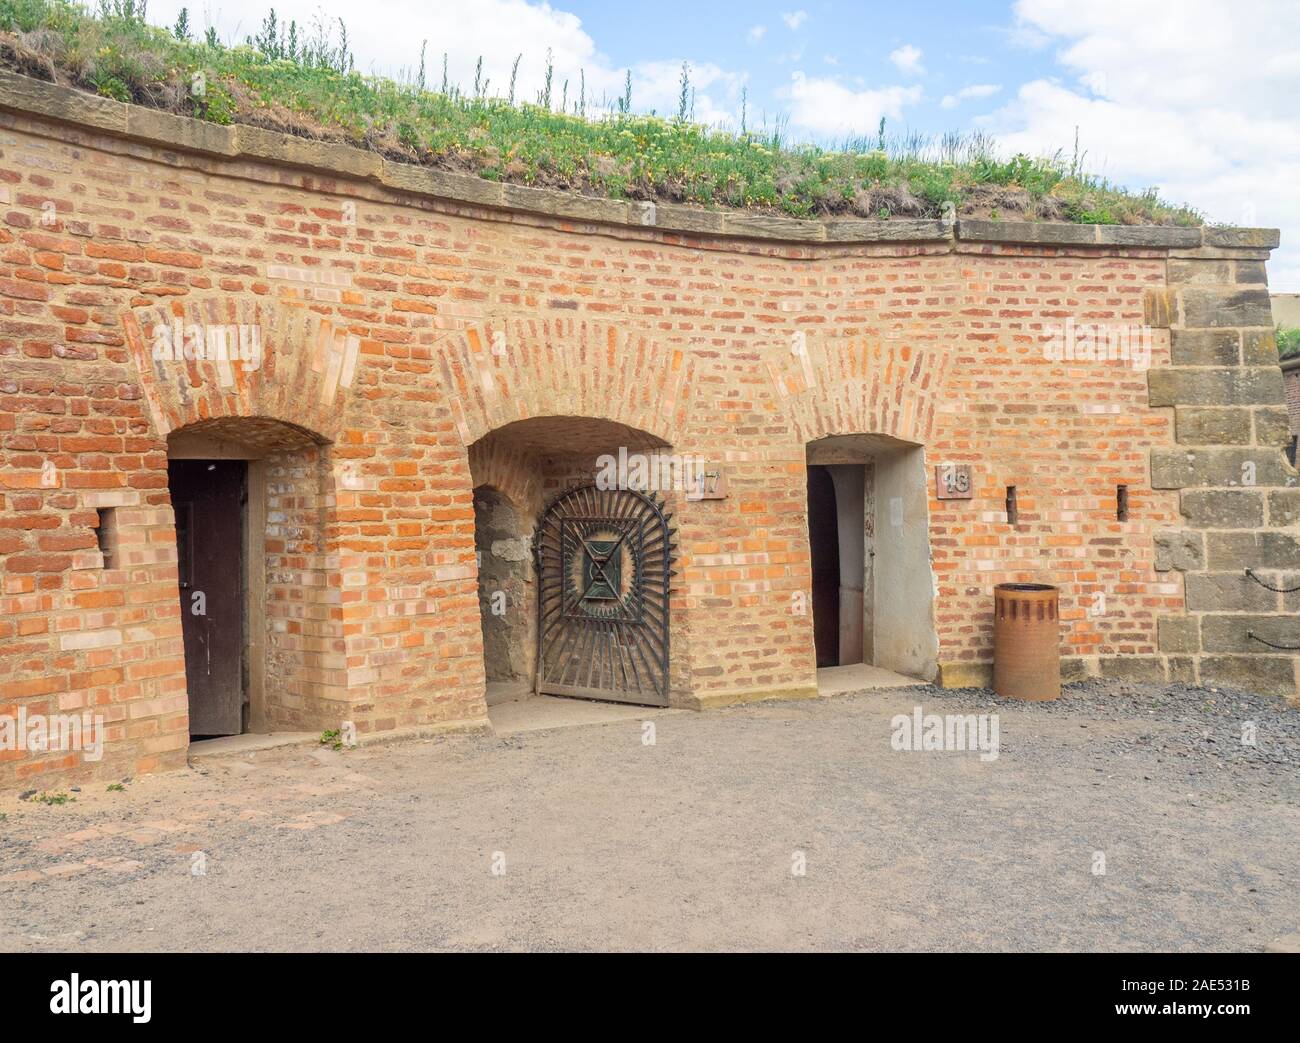 Entrance to solitary confinement prison cells in Theresienstadt Malá pevnost small fortress Nazi concentration camp Terezin Czech Republic. Stock Photo